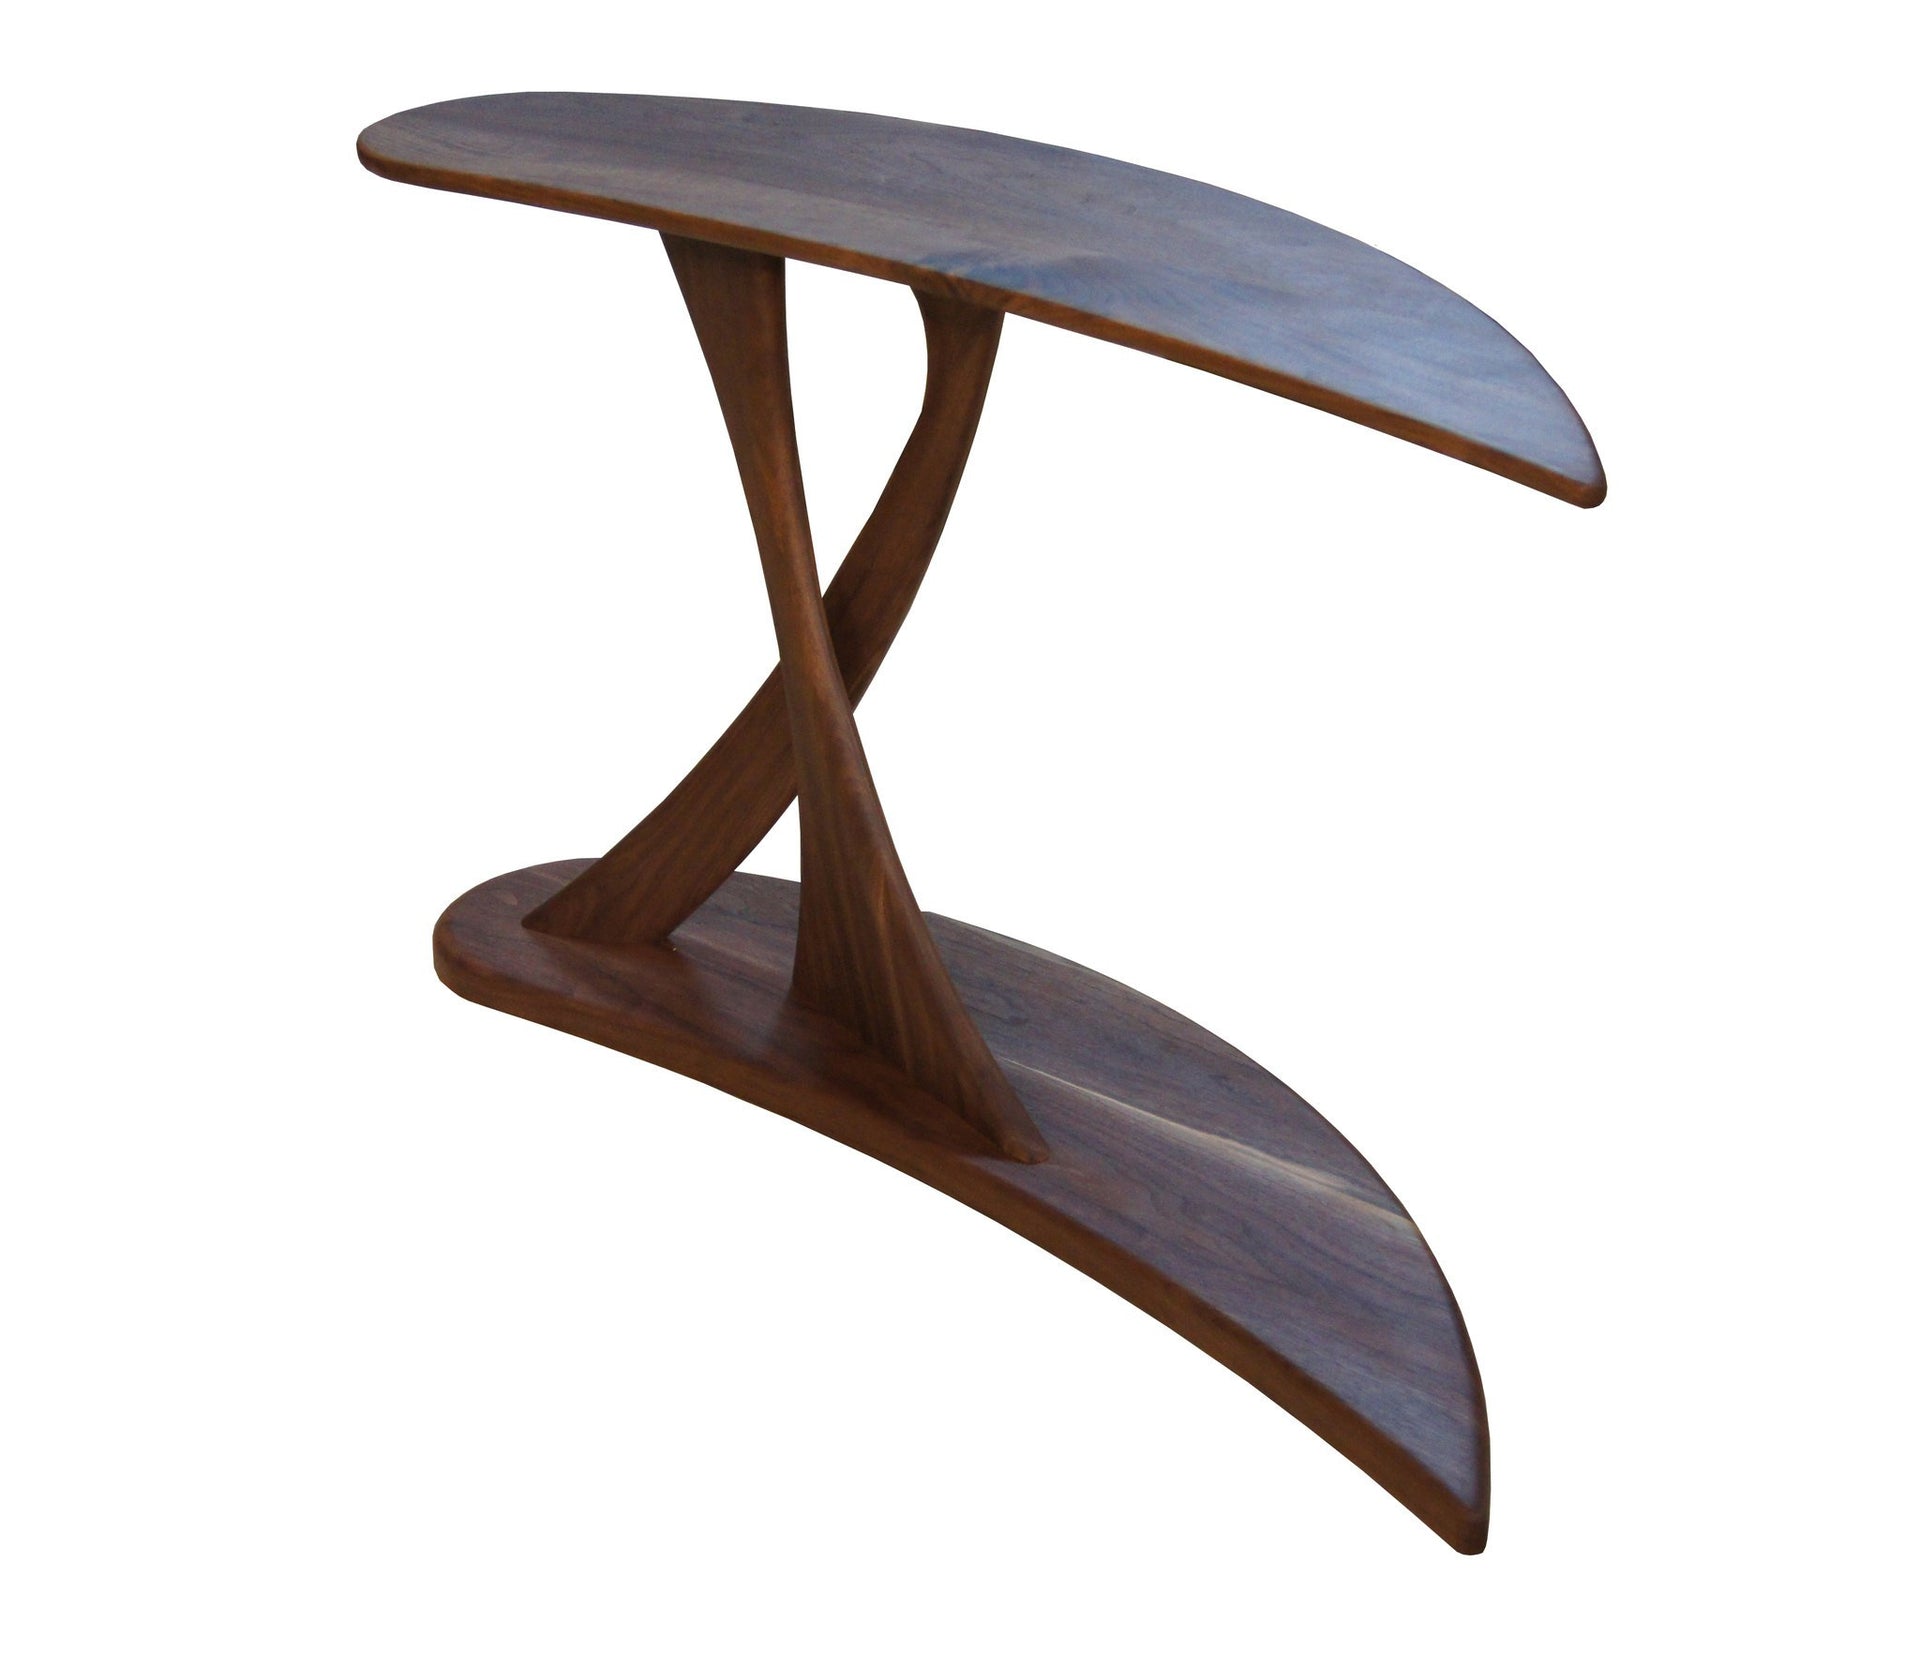 Cantilever Console Table made of Walnut Wood